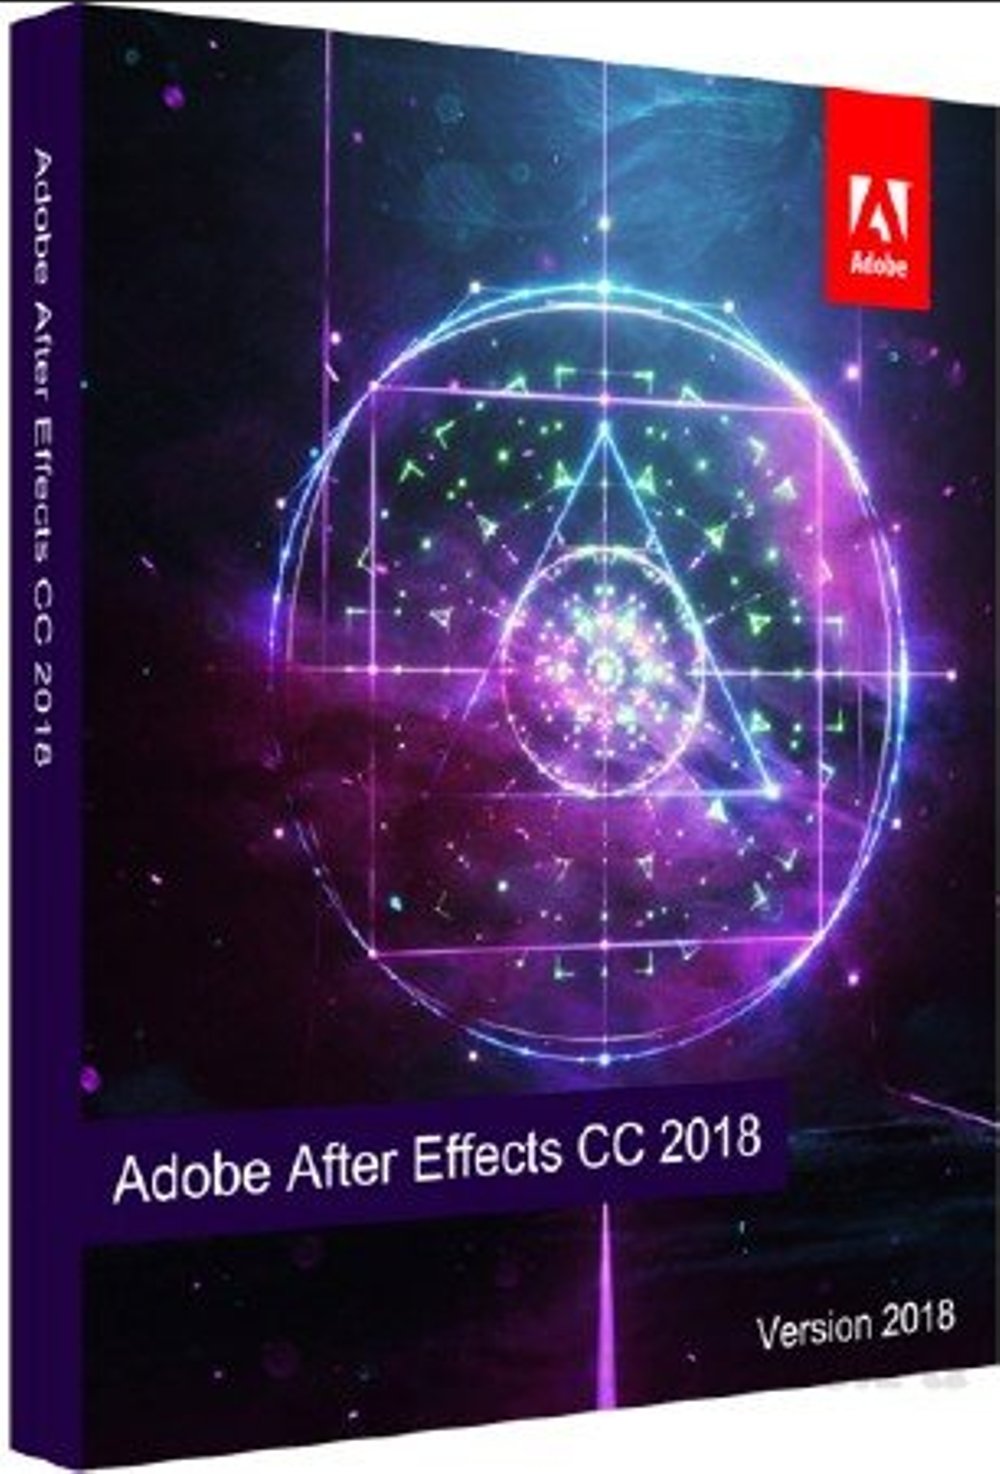 Free Download Adobe After Effects CC 2018 v15.1 Update 2 x64 Full Crack